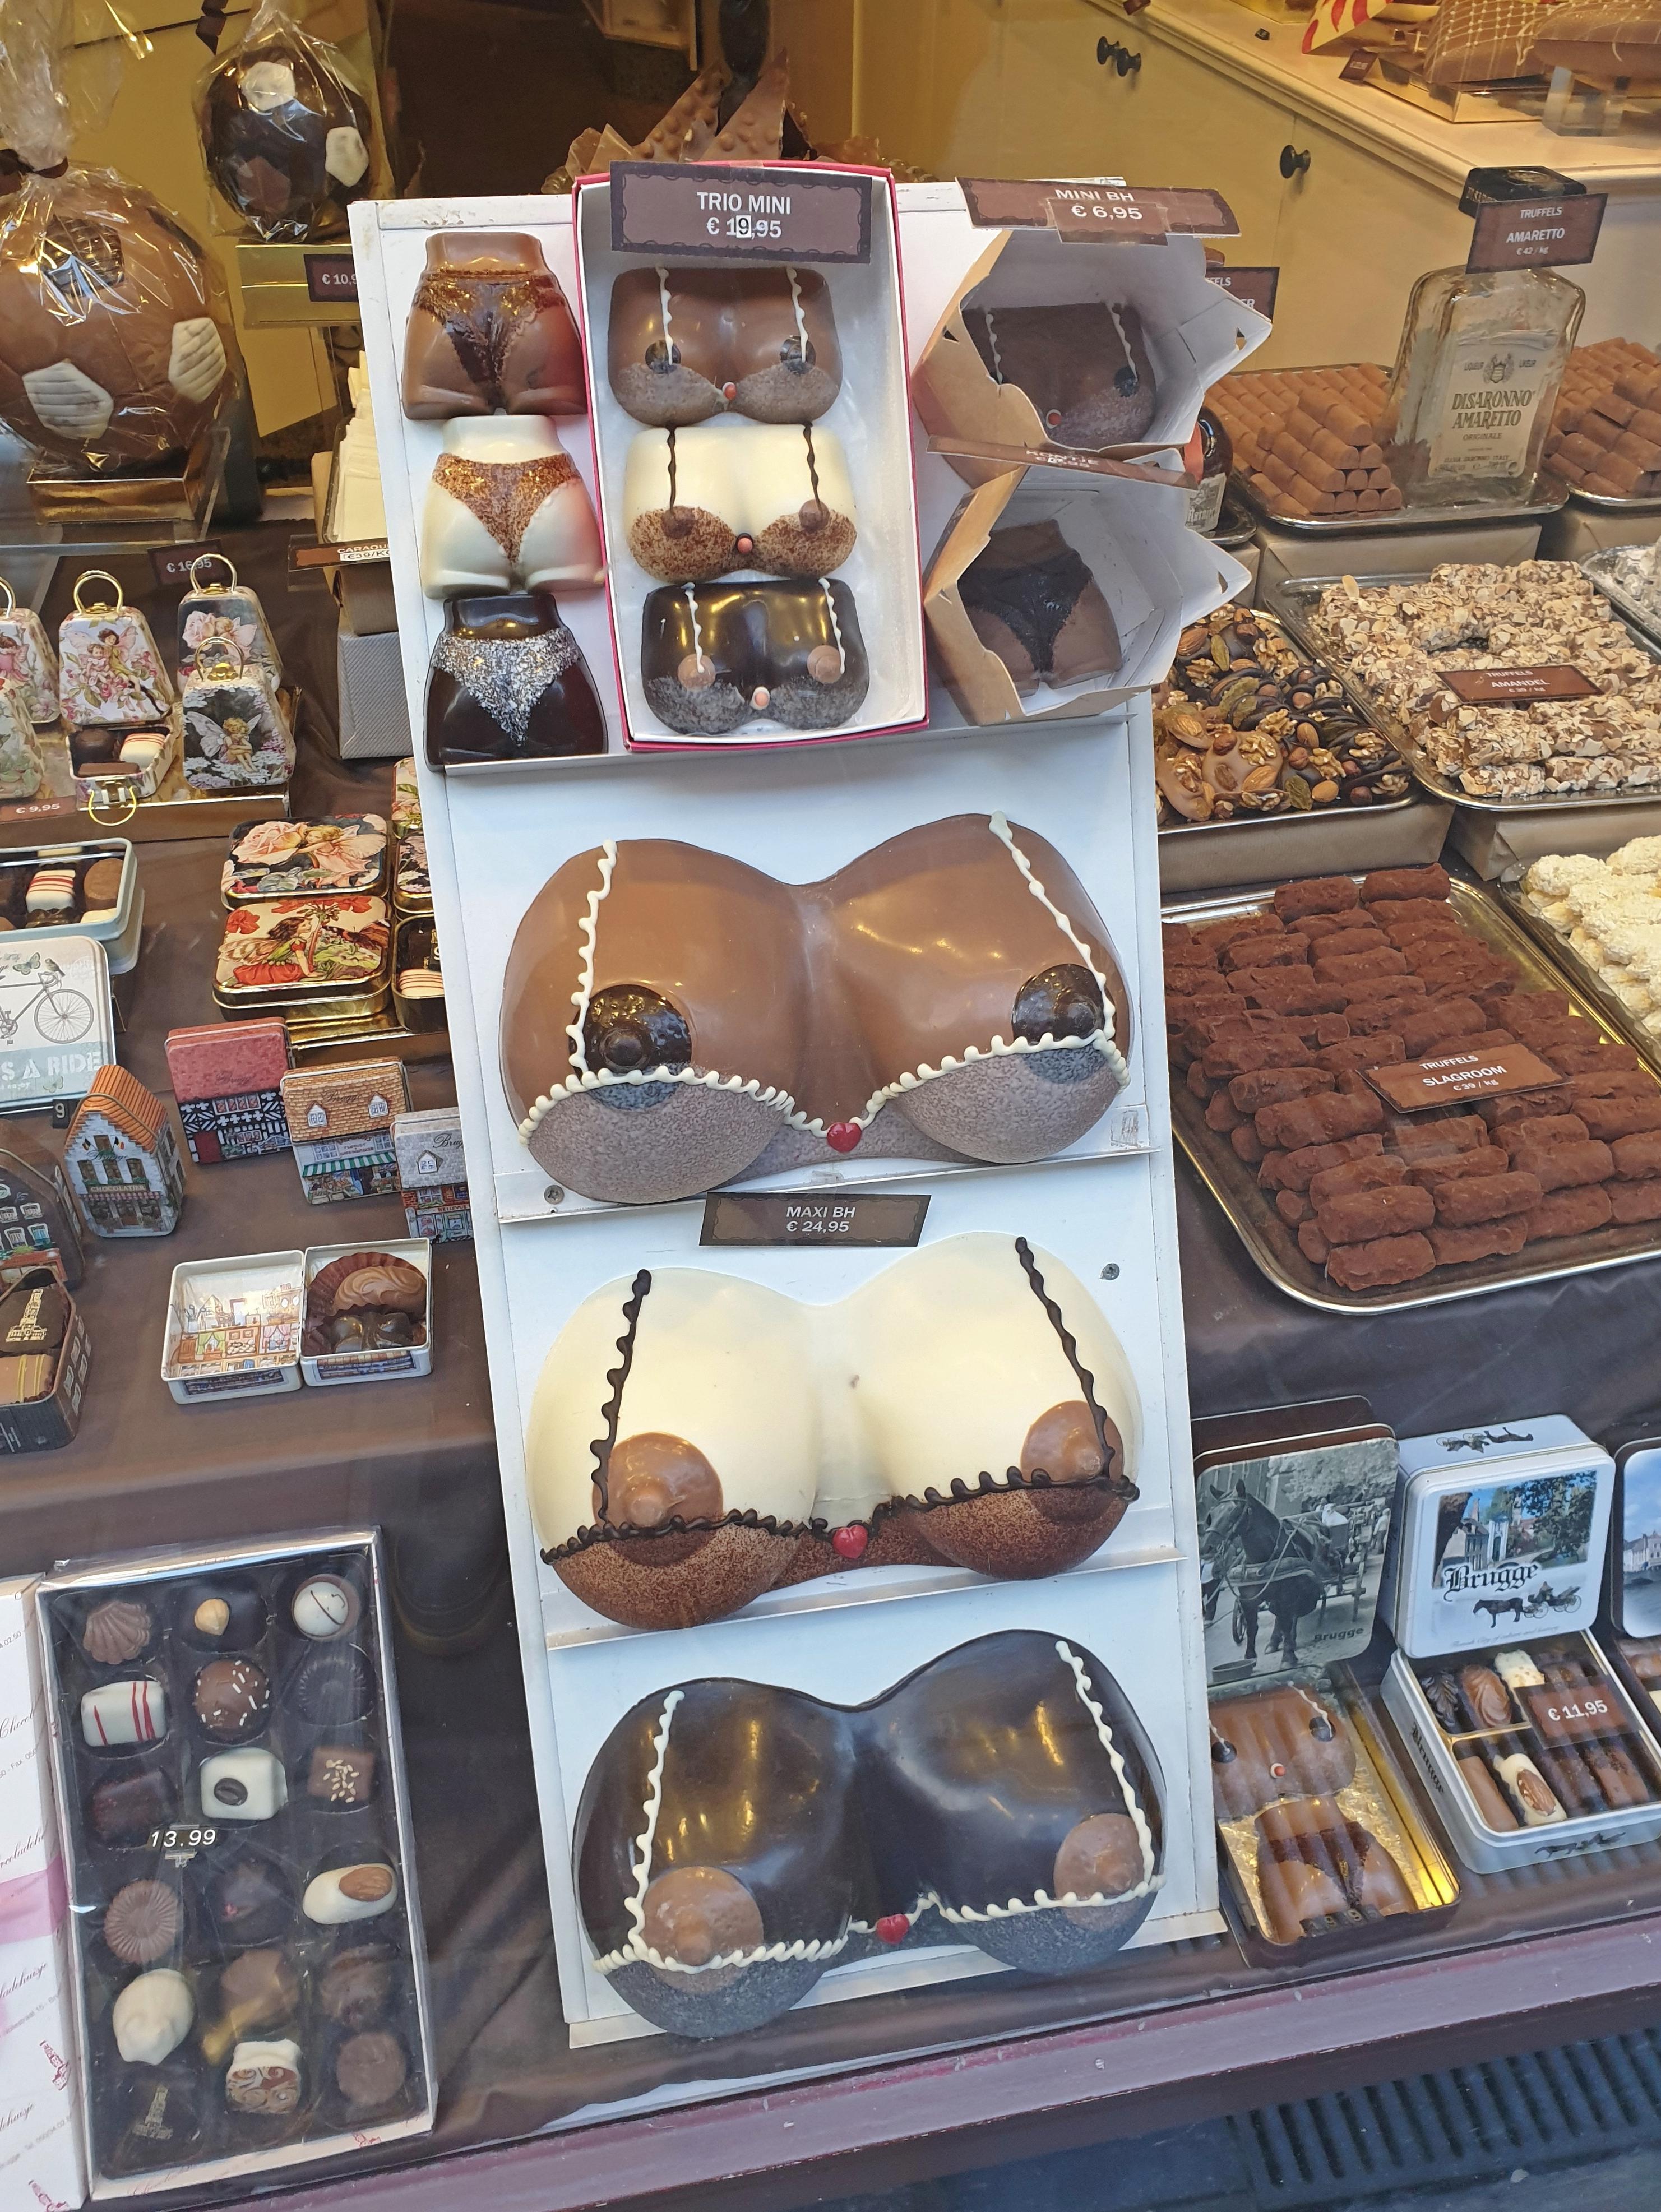 Belgian chocolate is sold in many shapes and sizes.